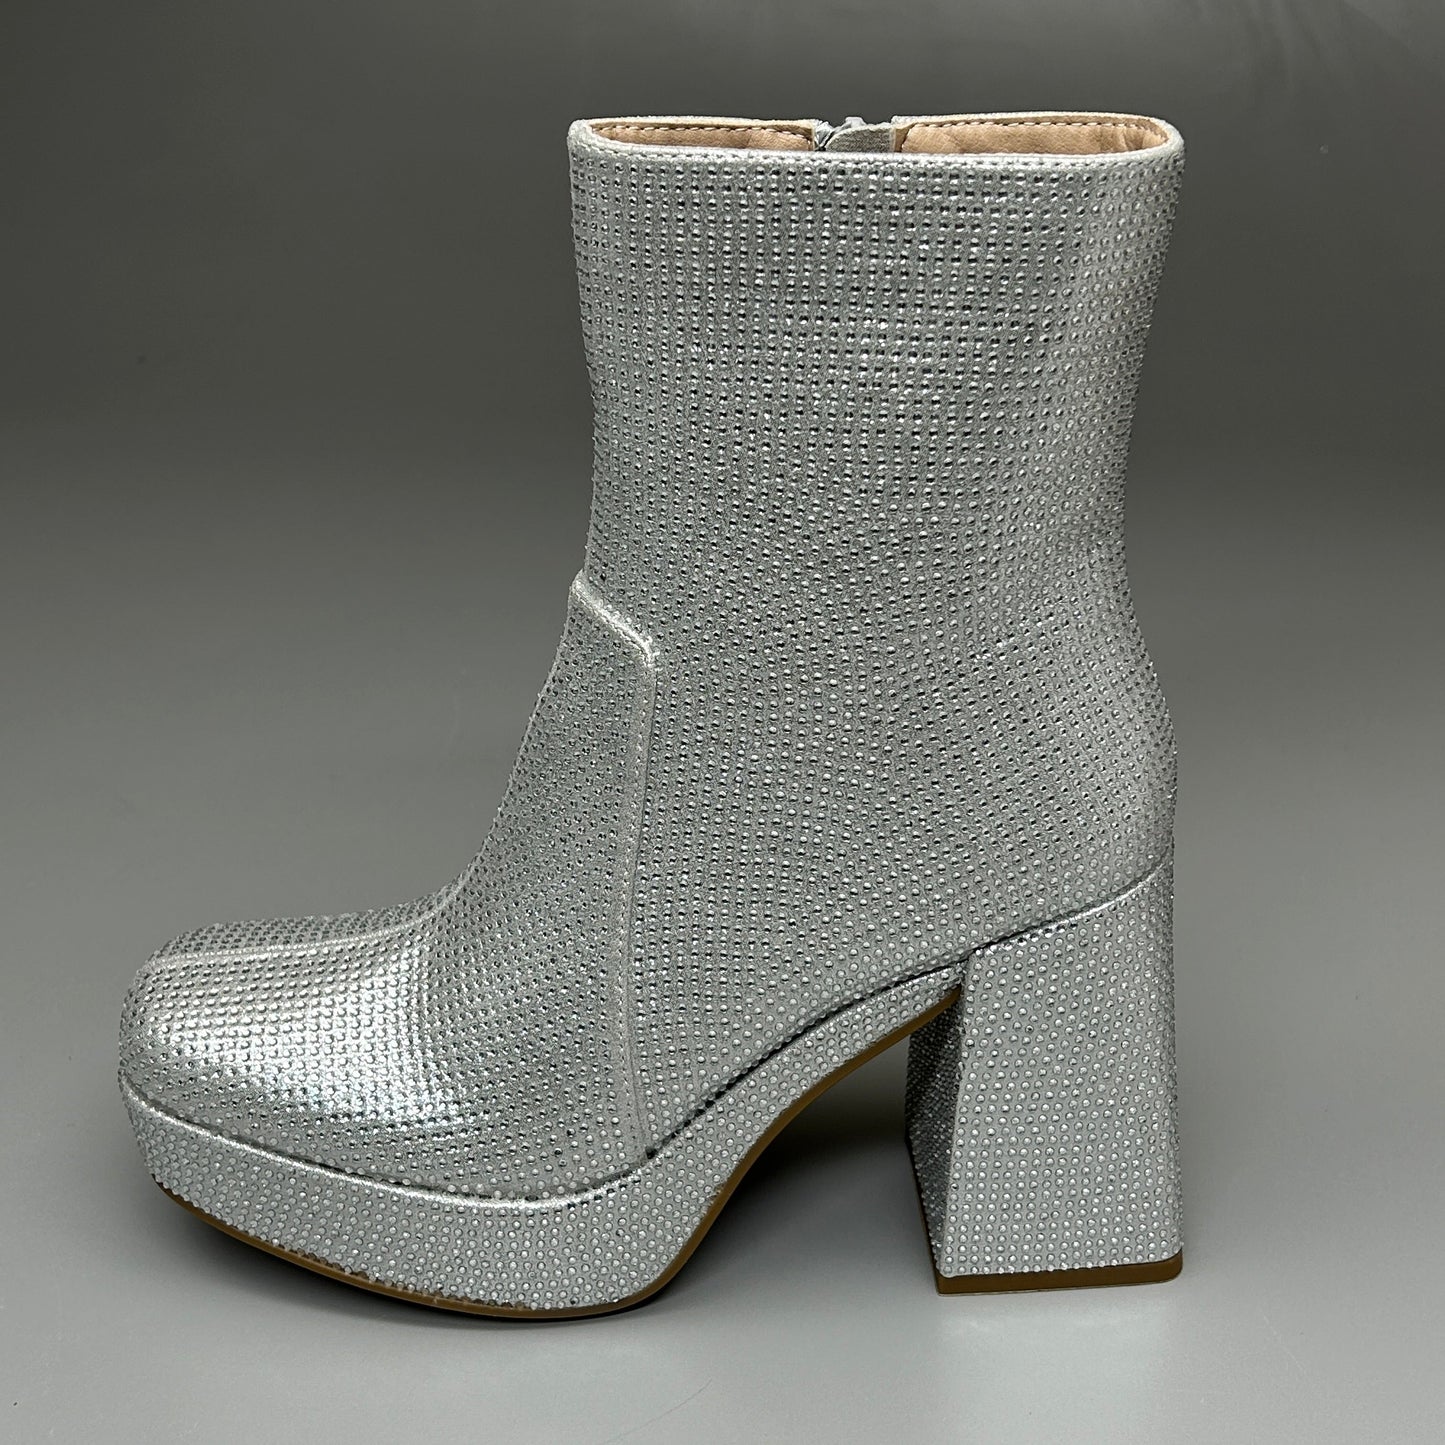 MIA Iva Silver Stone Heeled Boots Women's Sz 7 Silver GS1253108 (New)